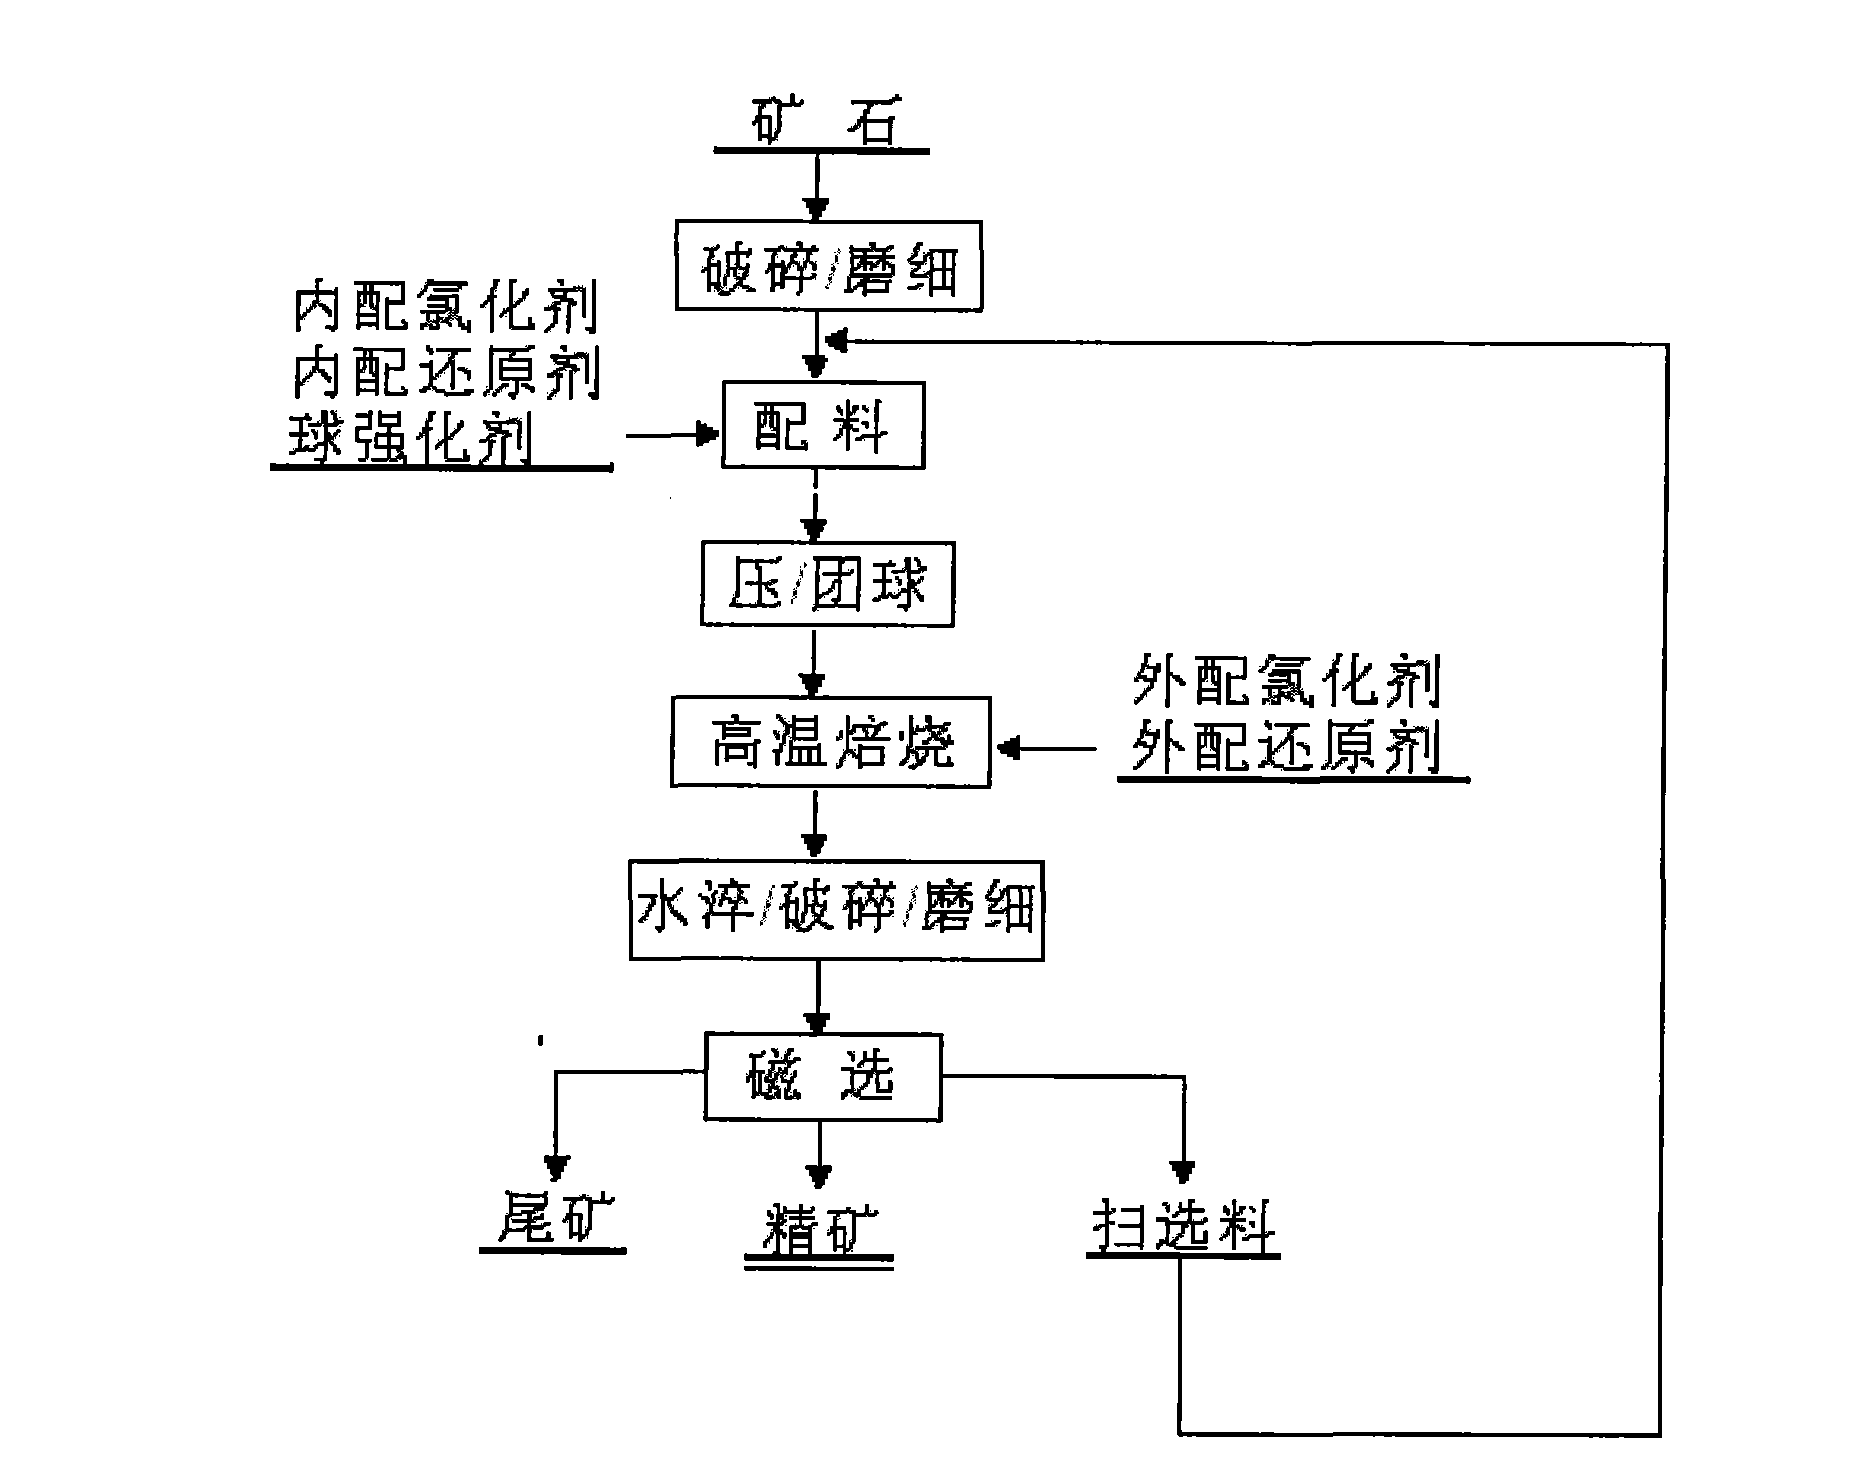 Method for efficiently concentrating cobalt and nickel from low-grade nickeliferous laterite ore